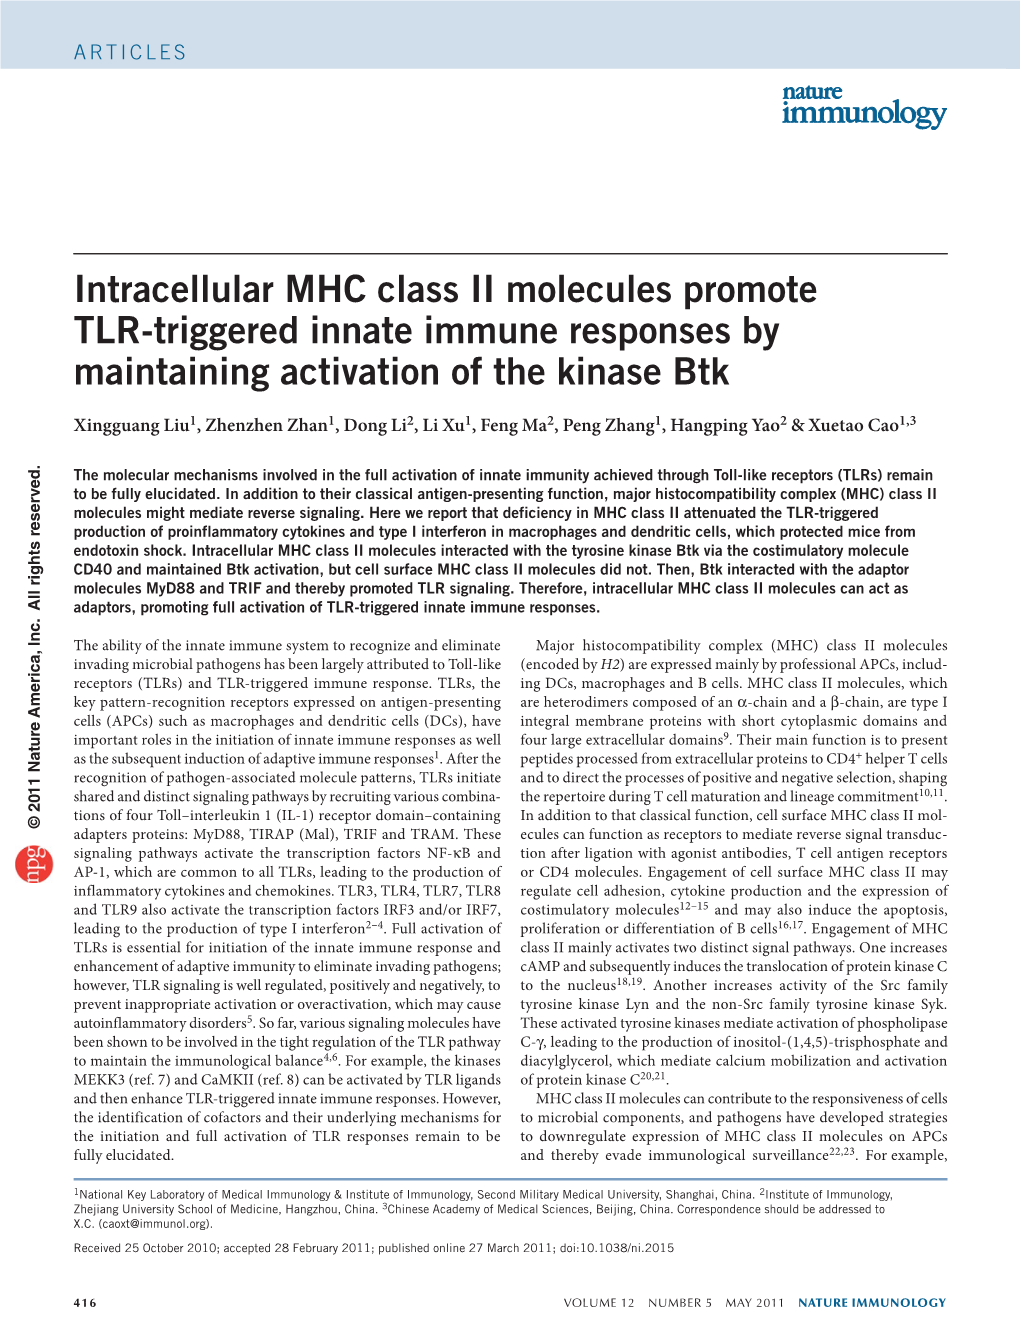 Intracellular MHC Class II Molecules Promote TLR-Triggered Innate Immune Responses by Maintaining Activation of the Kinase Btk